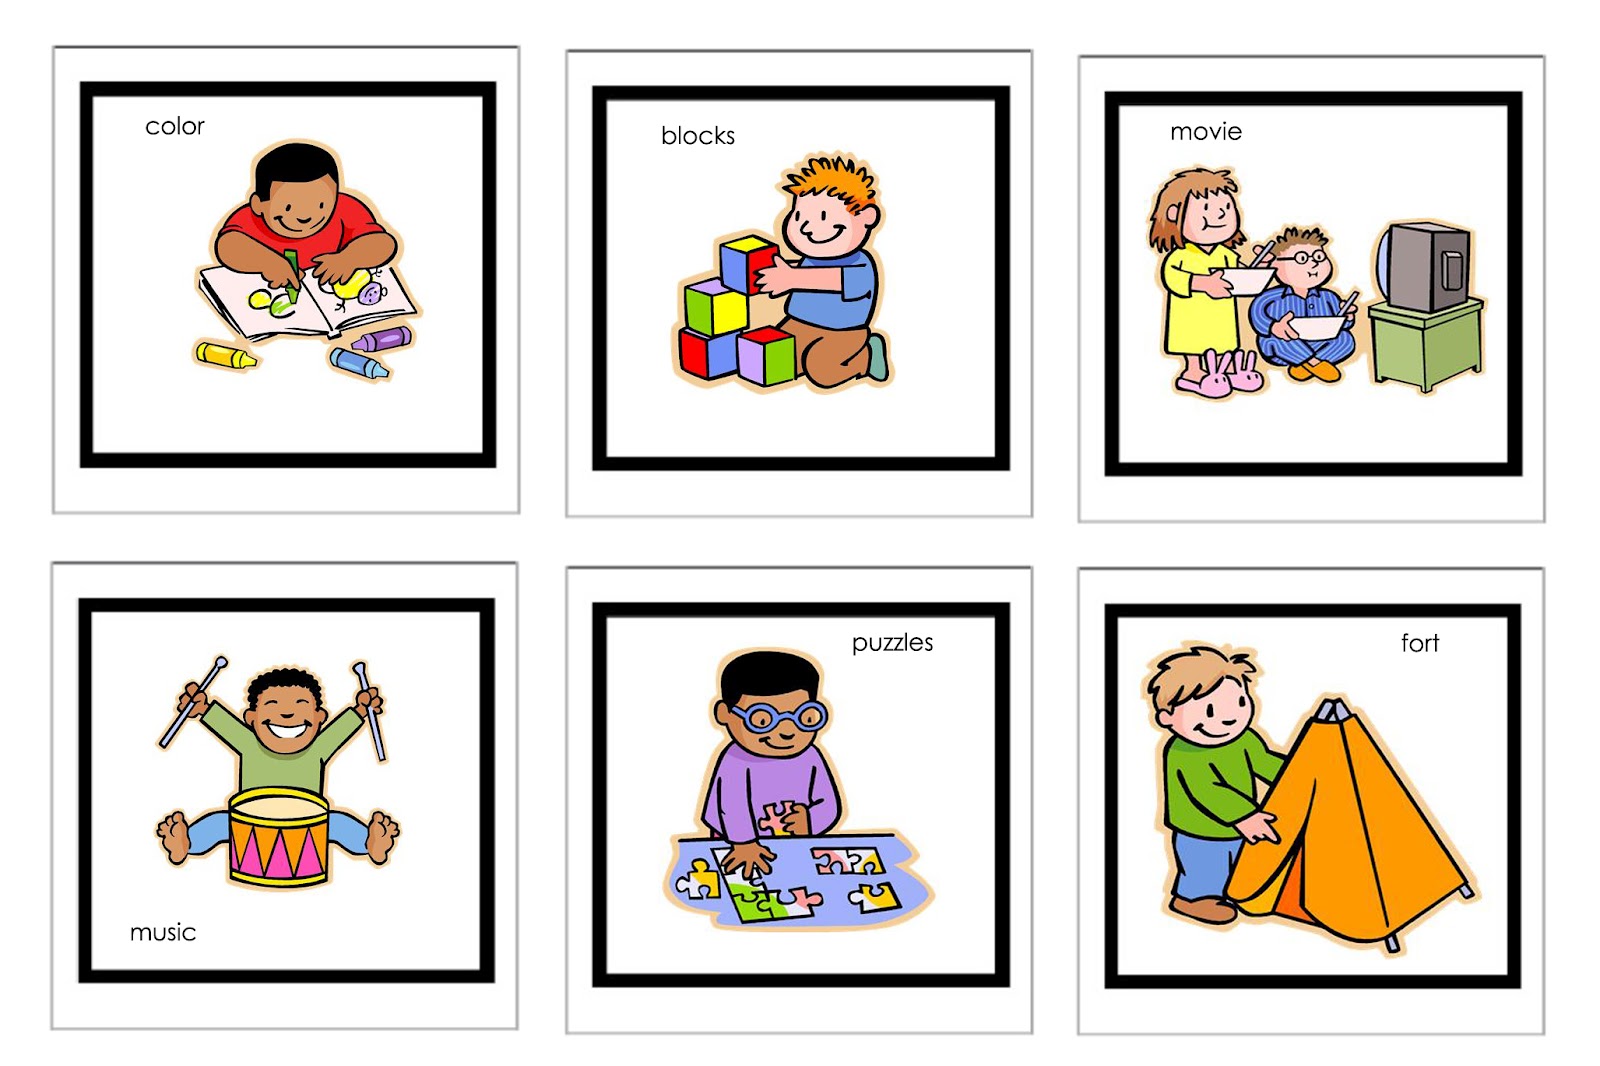 kids daily schedule clipart